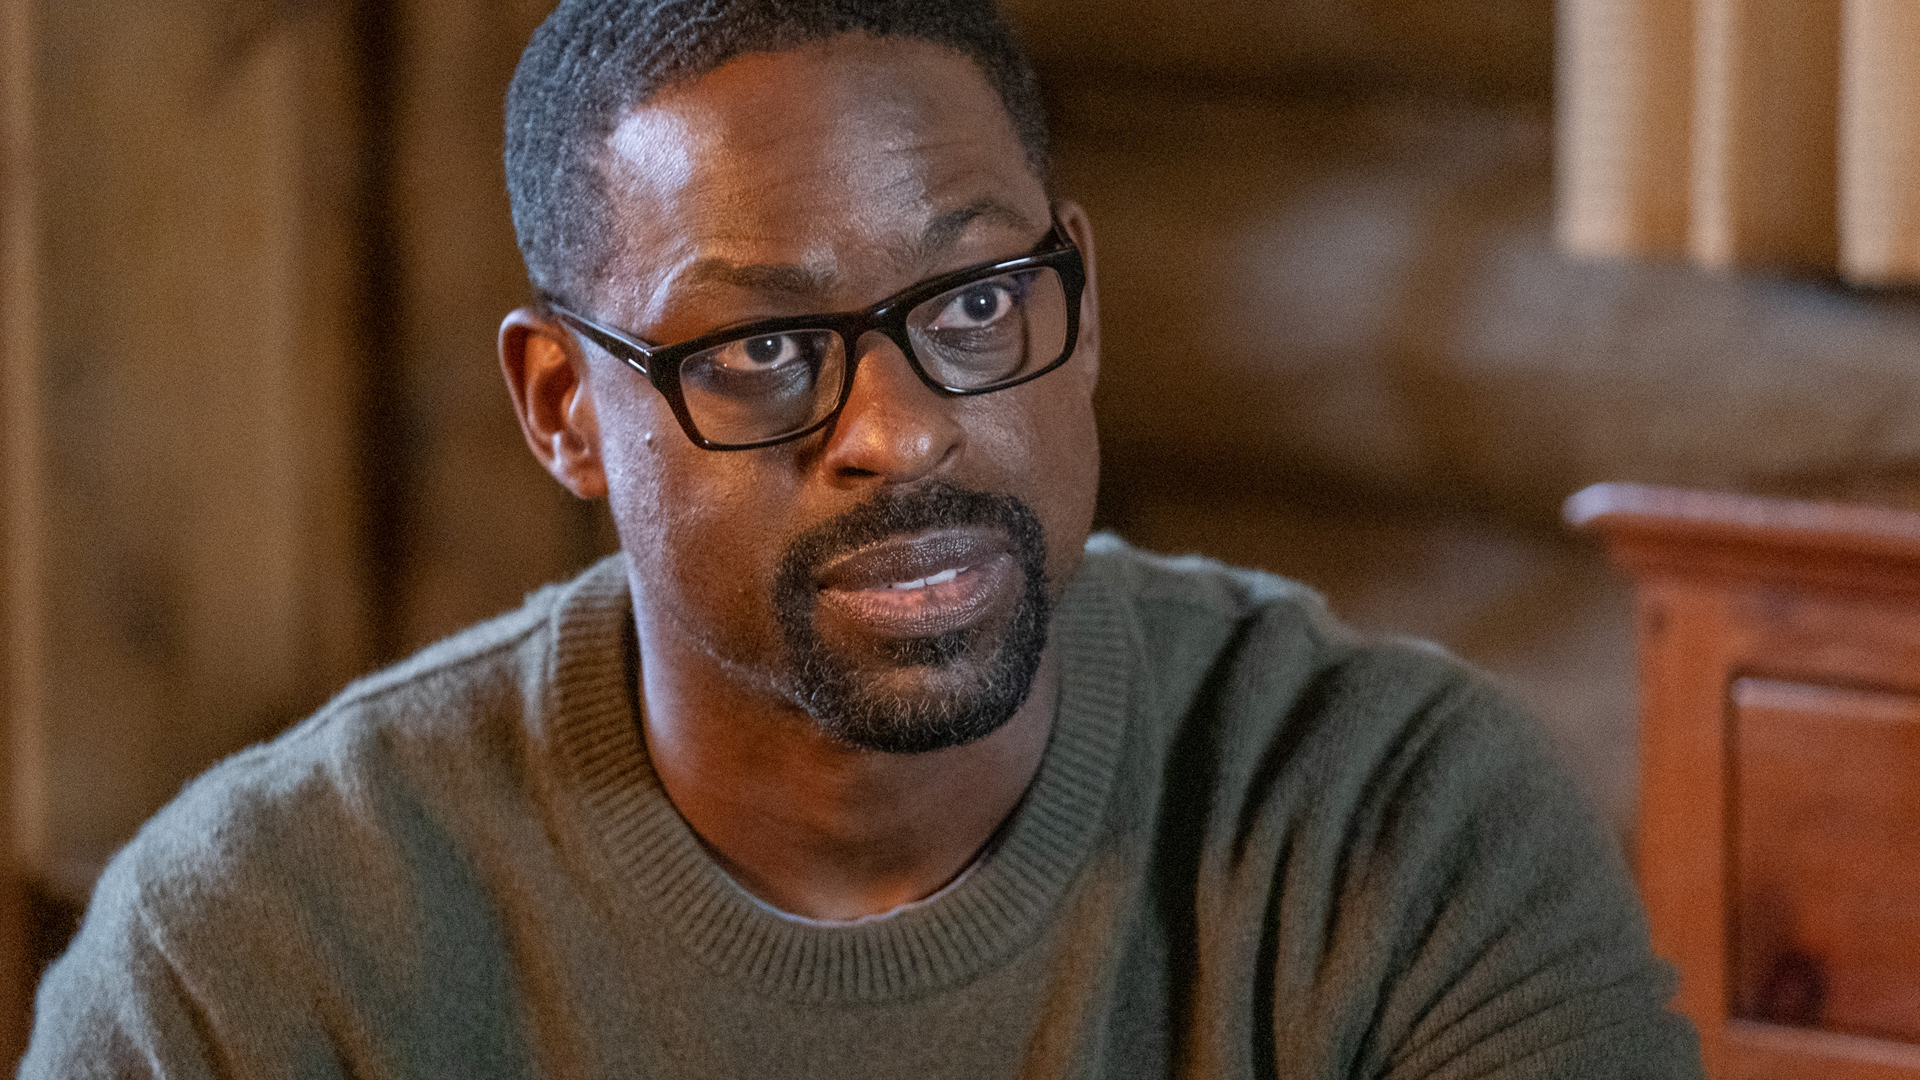 Sterling K. Brown as Randall Pearson talking in ‘This Is Us’ Season 5 Episode 15, ‘Jerry 2.0’